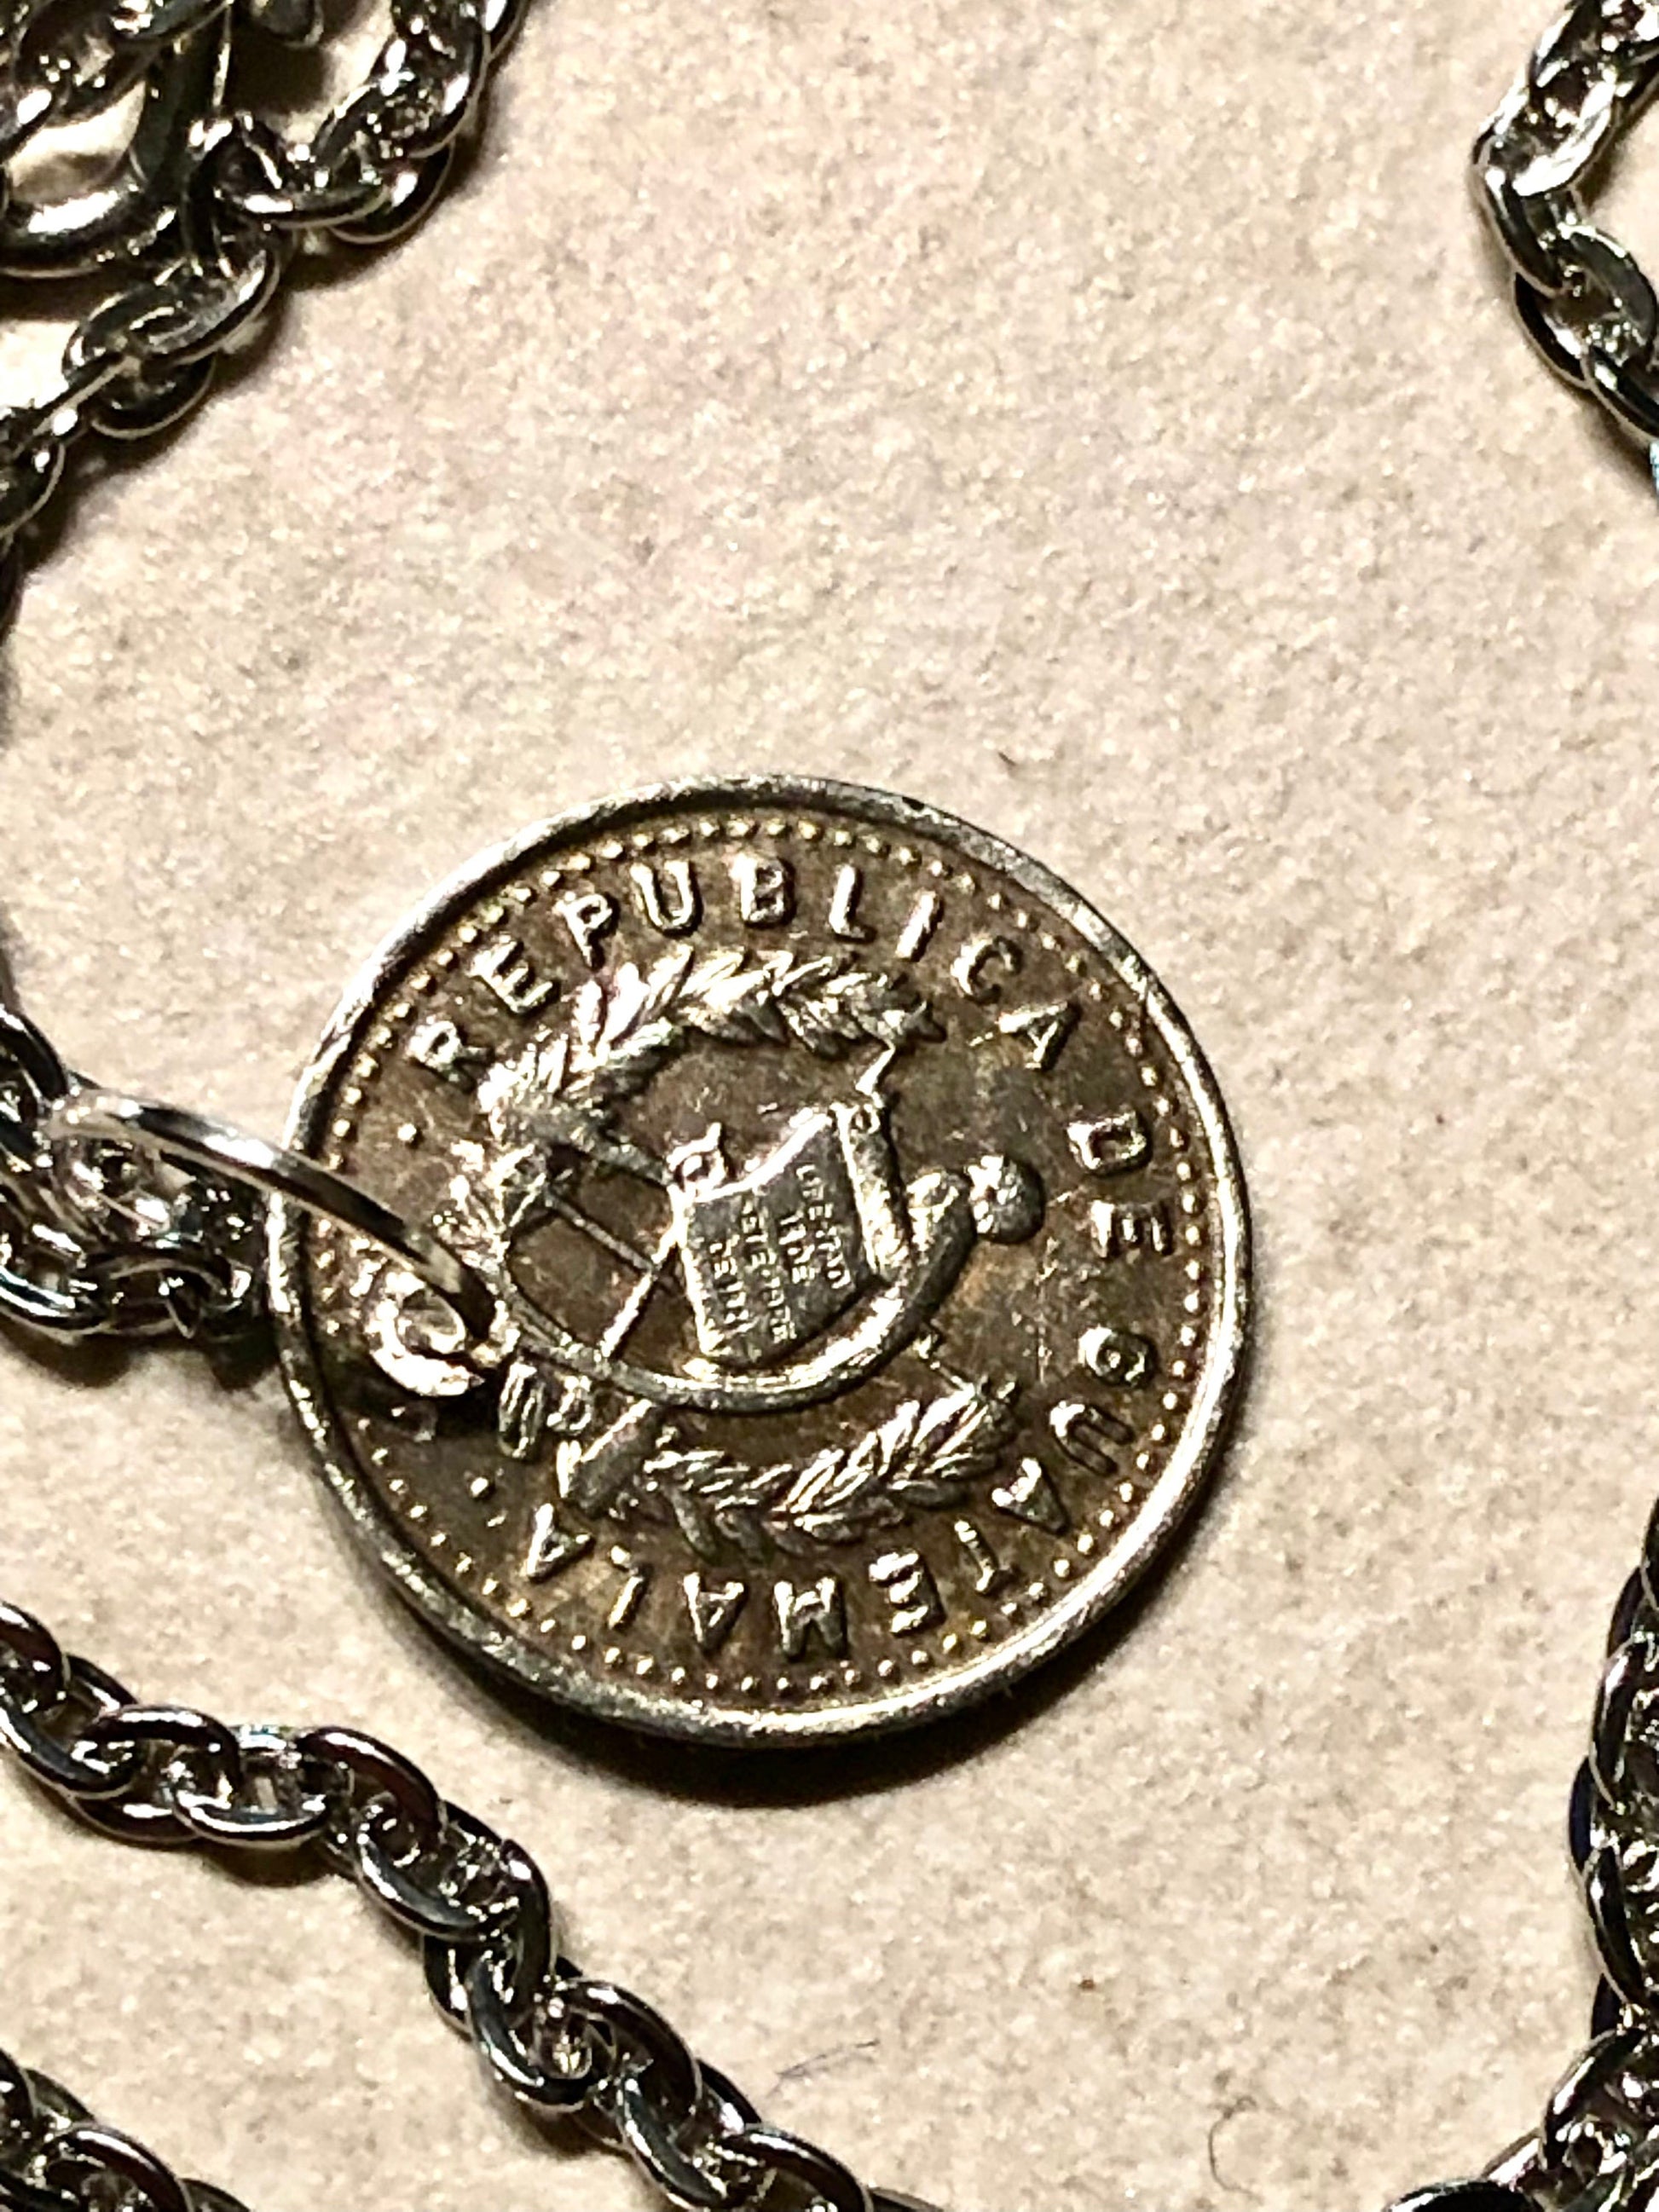 Guatemala Coin Necklace Five Centavo Coin Pendant Jewelry Custom Made Vintage and Rare coins - Coin Enthusiast Fashion Accessory Handmade